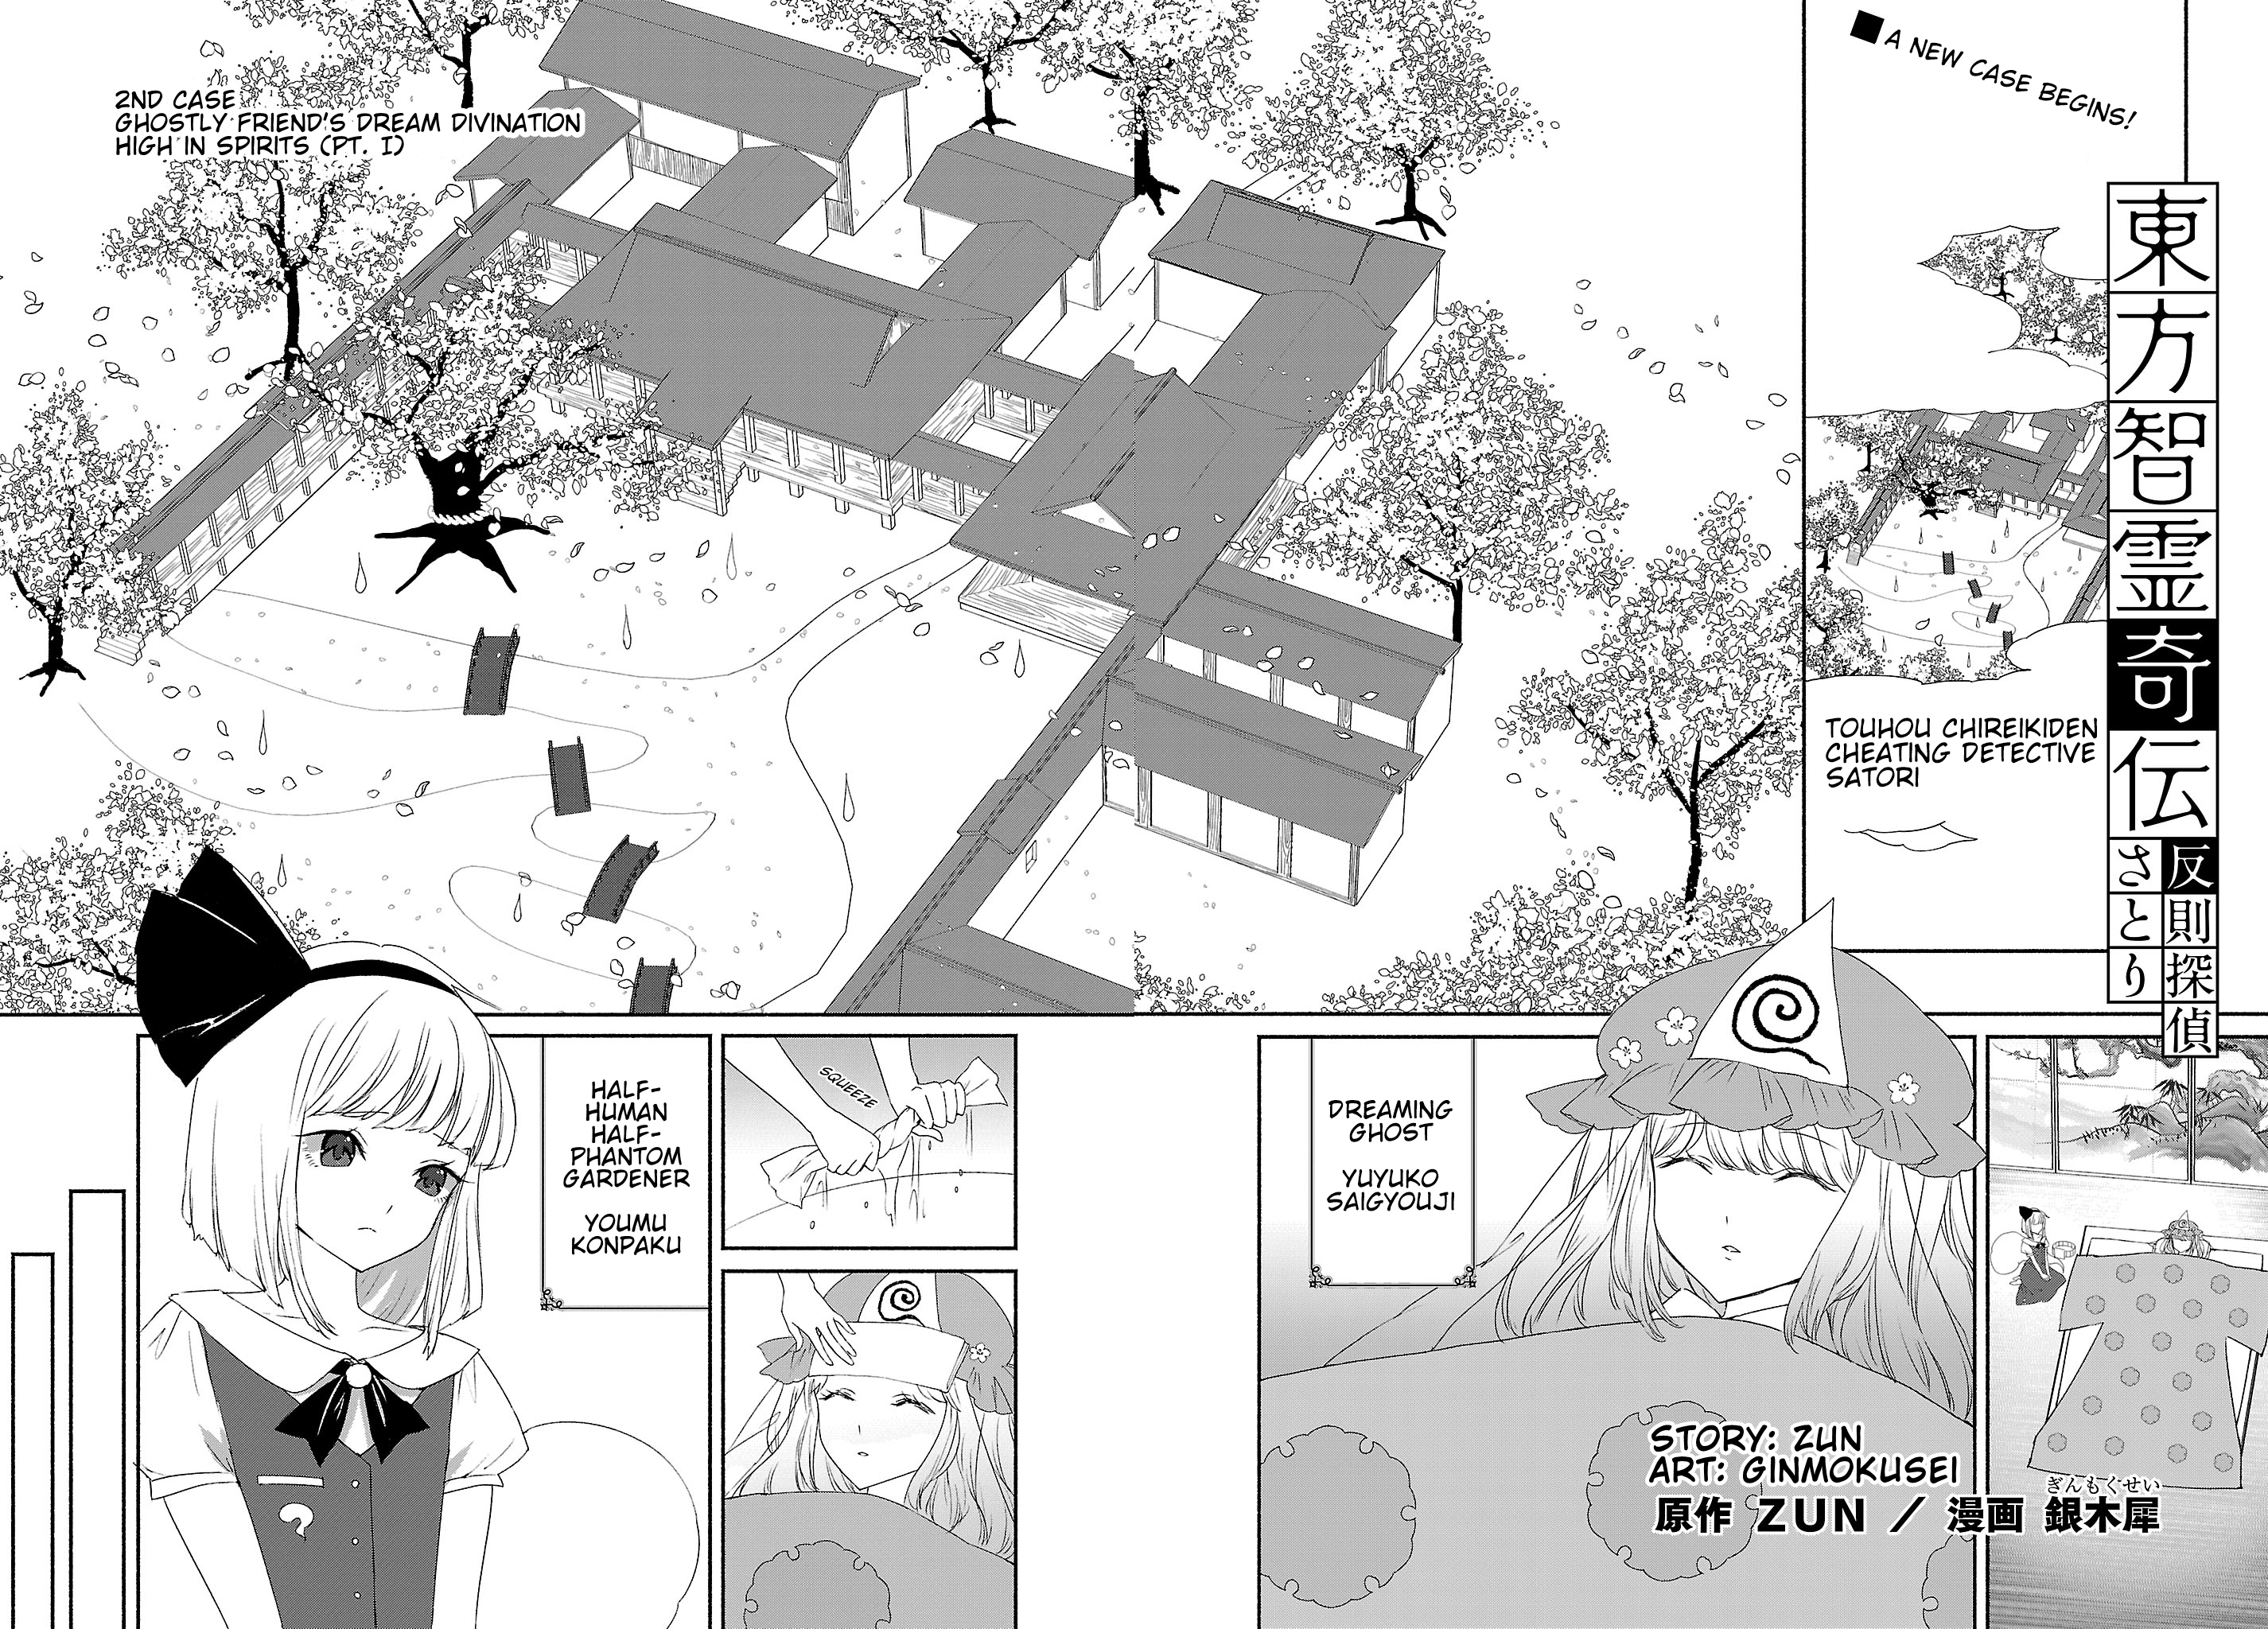 Touhou Chireikiden ~ Hansoku Tantei Satori Chapter 5: Ghostly Friend’S Dream Divination High In Spirits (Pt. I) - Picture 1